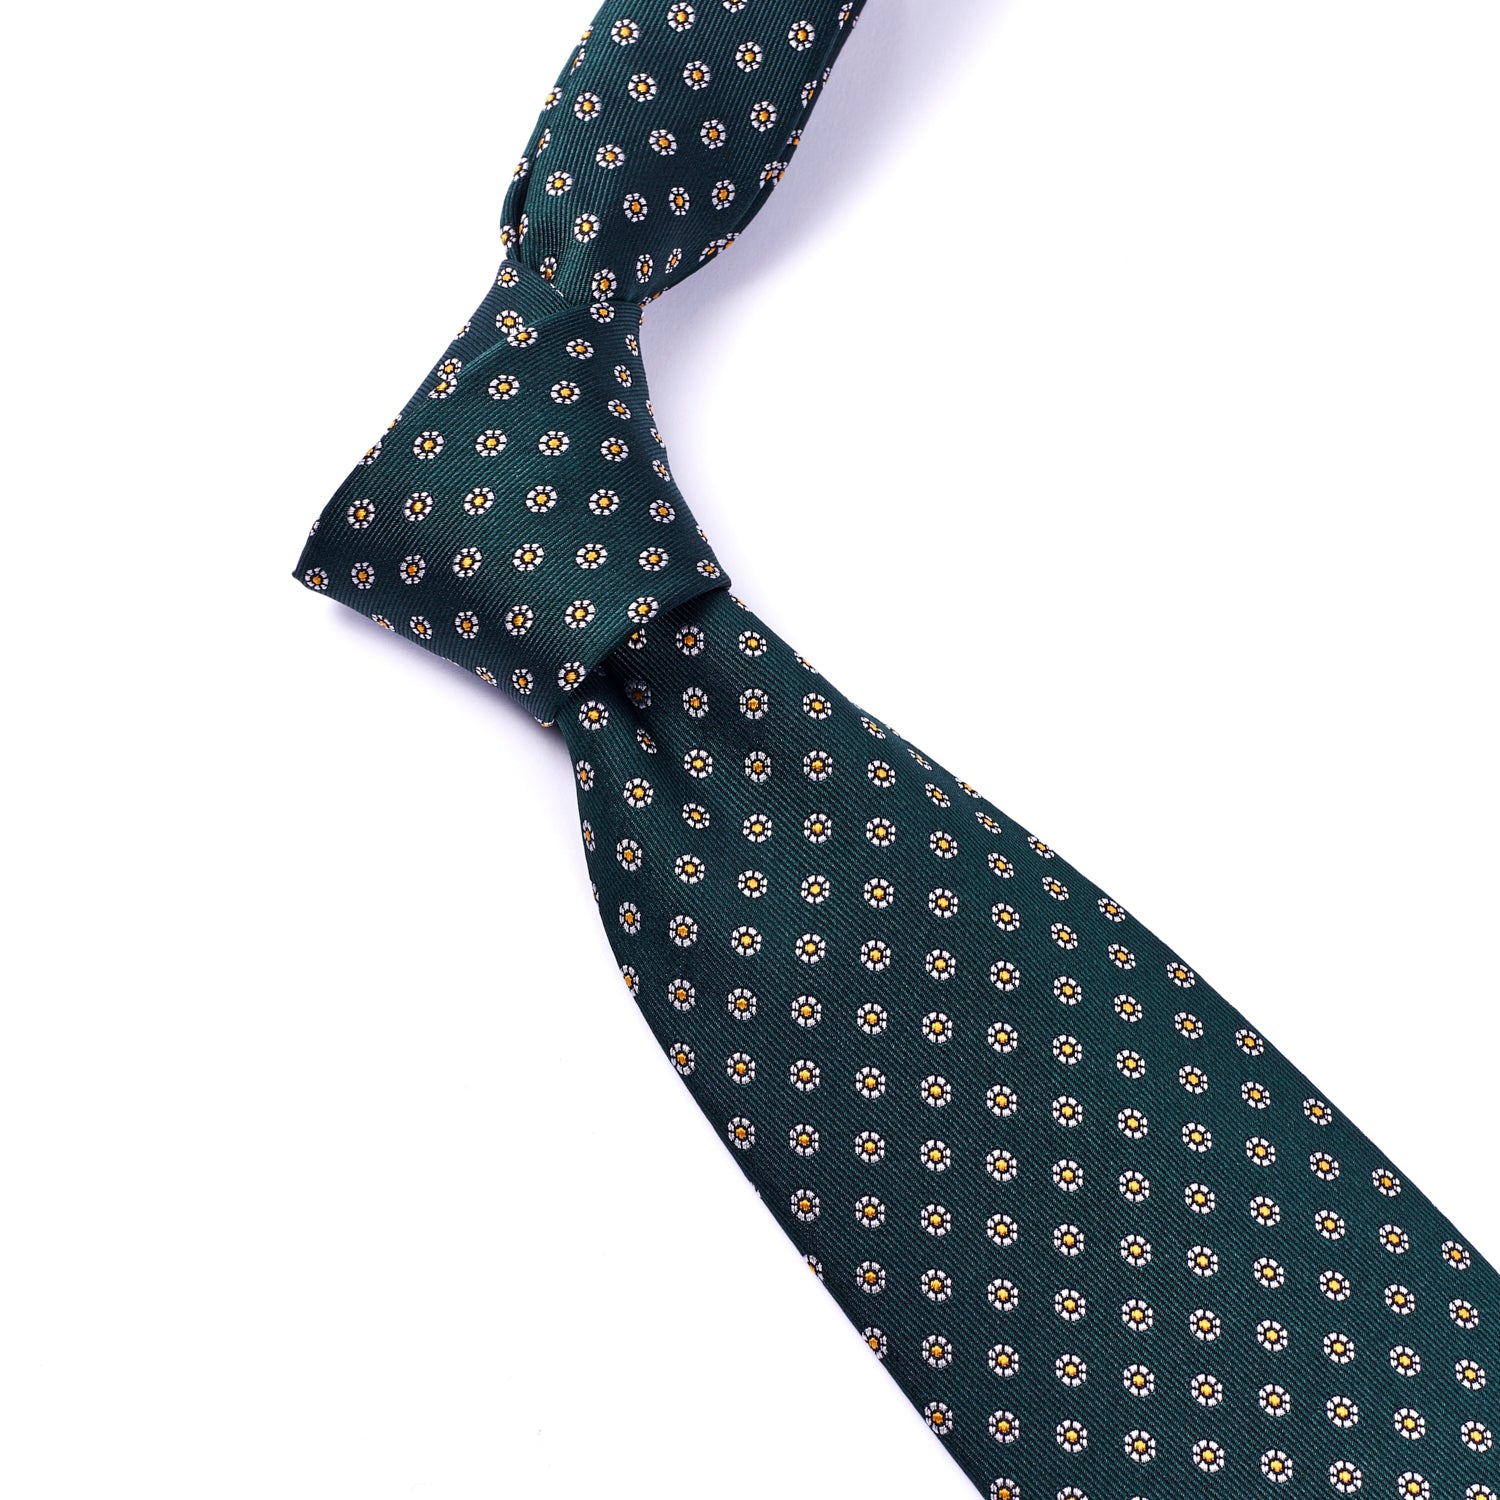 A Sovereign Grade Hunter Green Floral Jacquard tie, 150 cm, on a white background from KirbyAllison.com.